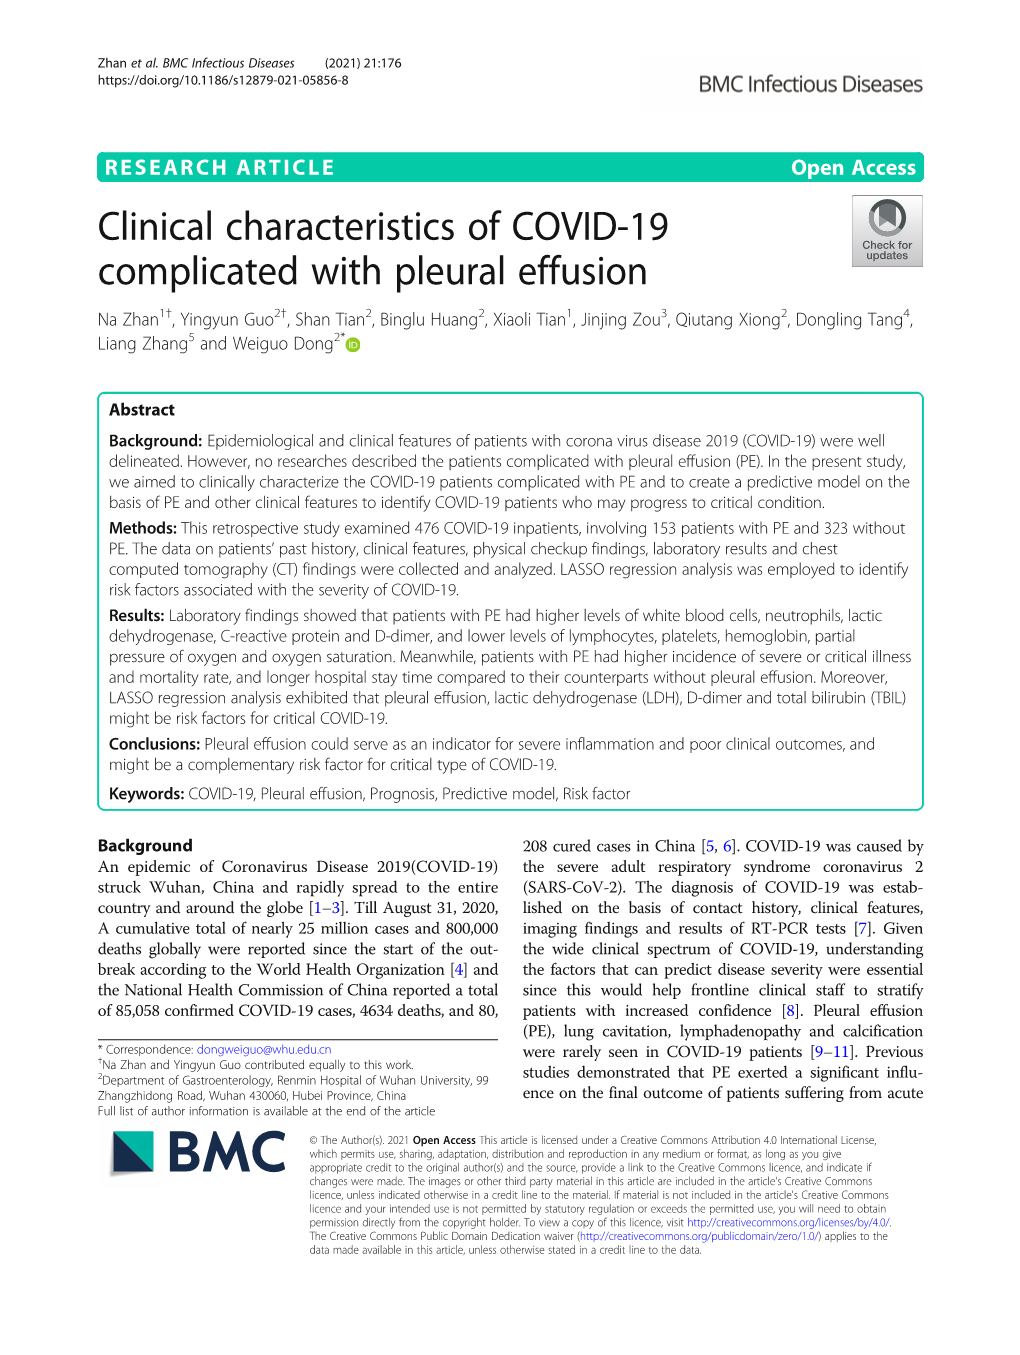 Clinical Characteristics of COVID-19 Complicated with Pleural Effusion